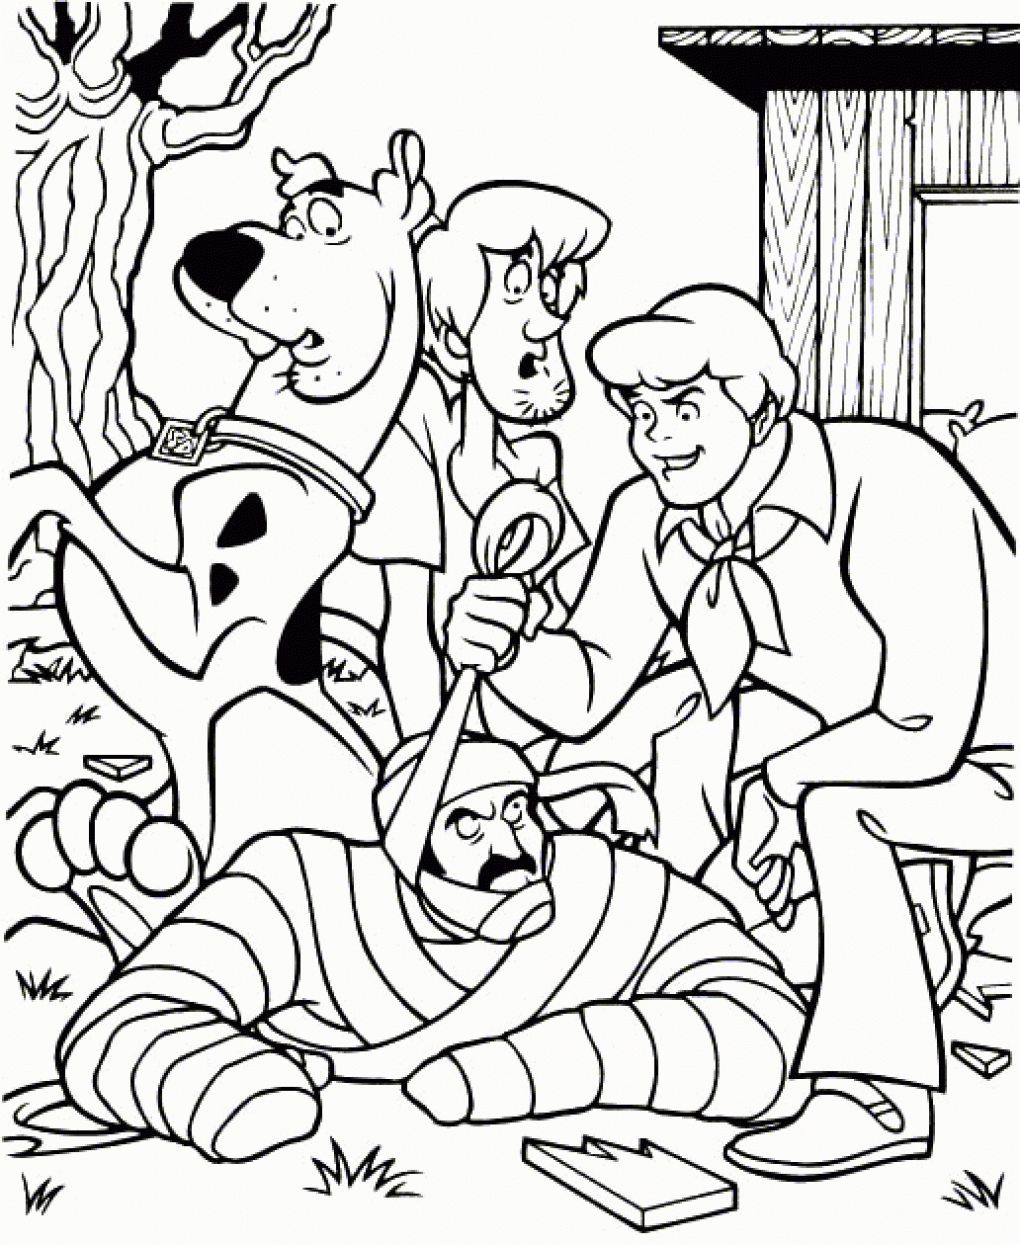 Scooby Doo Coloring Pages TV Film Scooby Doo and Friends for Kids 2020 07288 Coloring4free